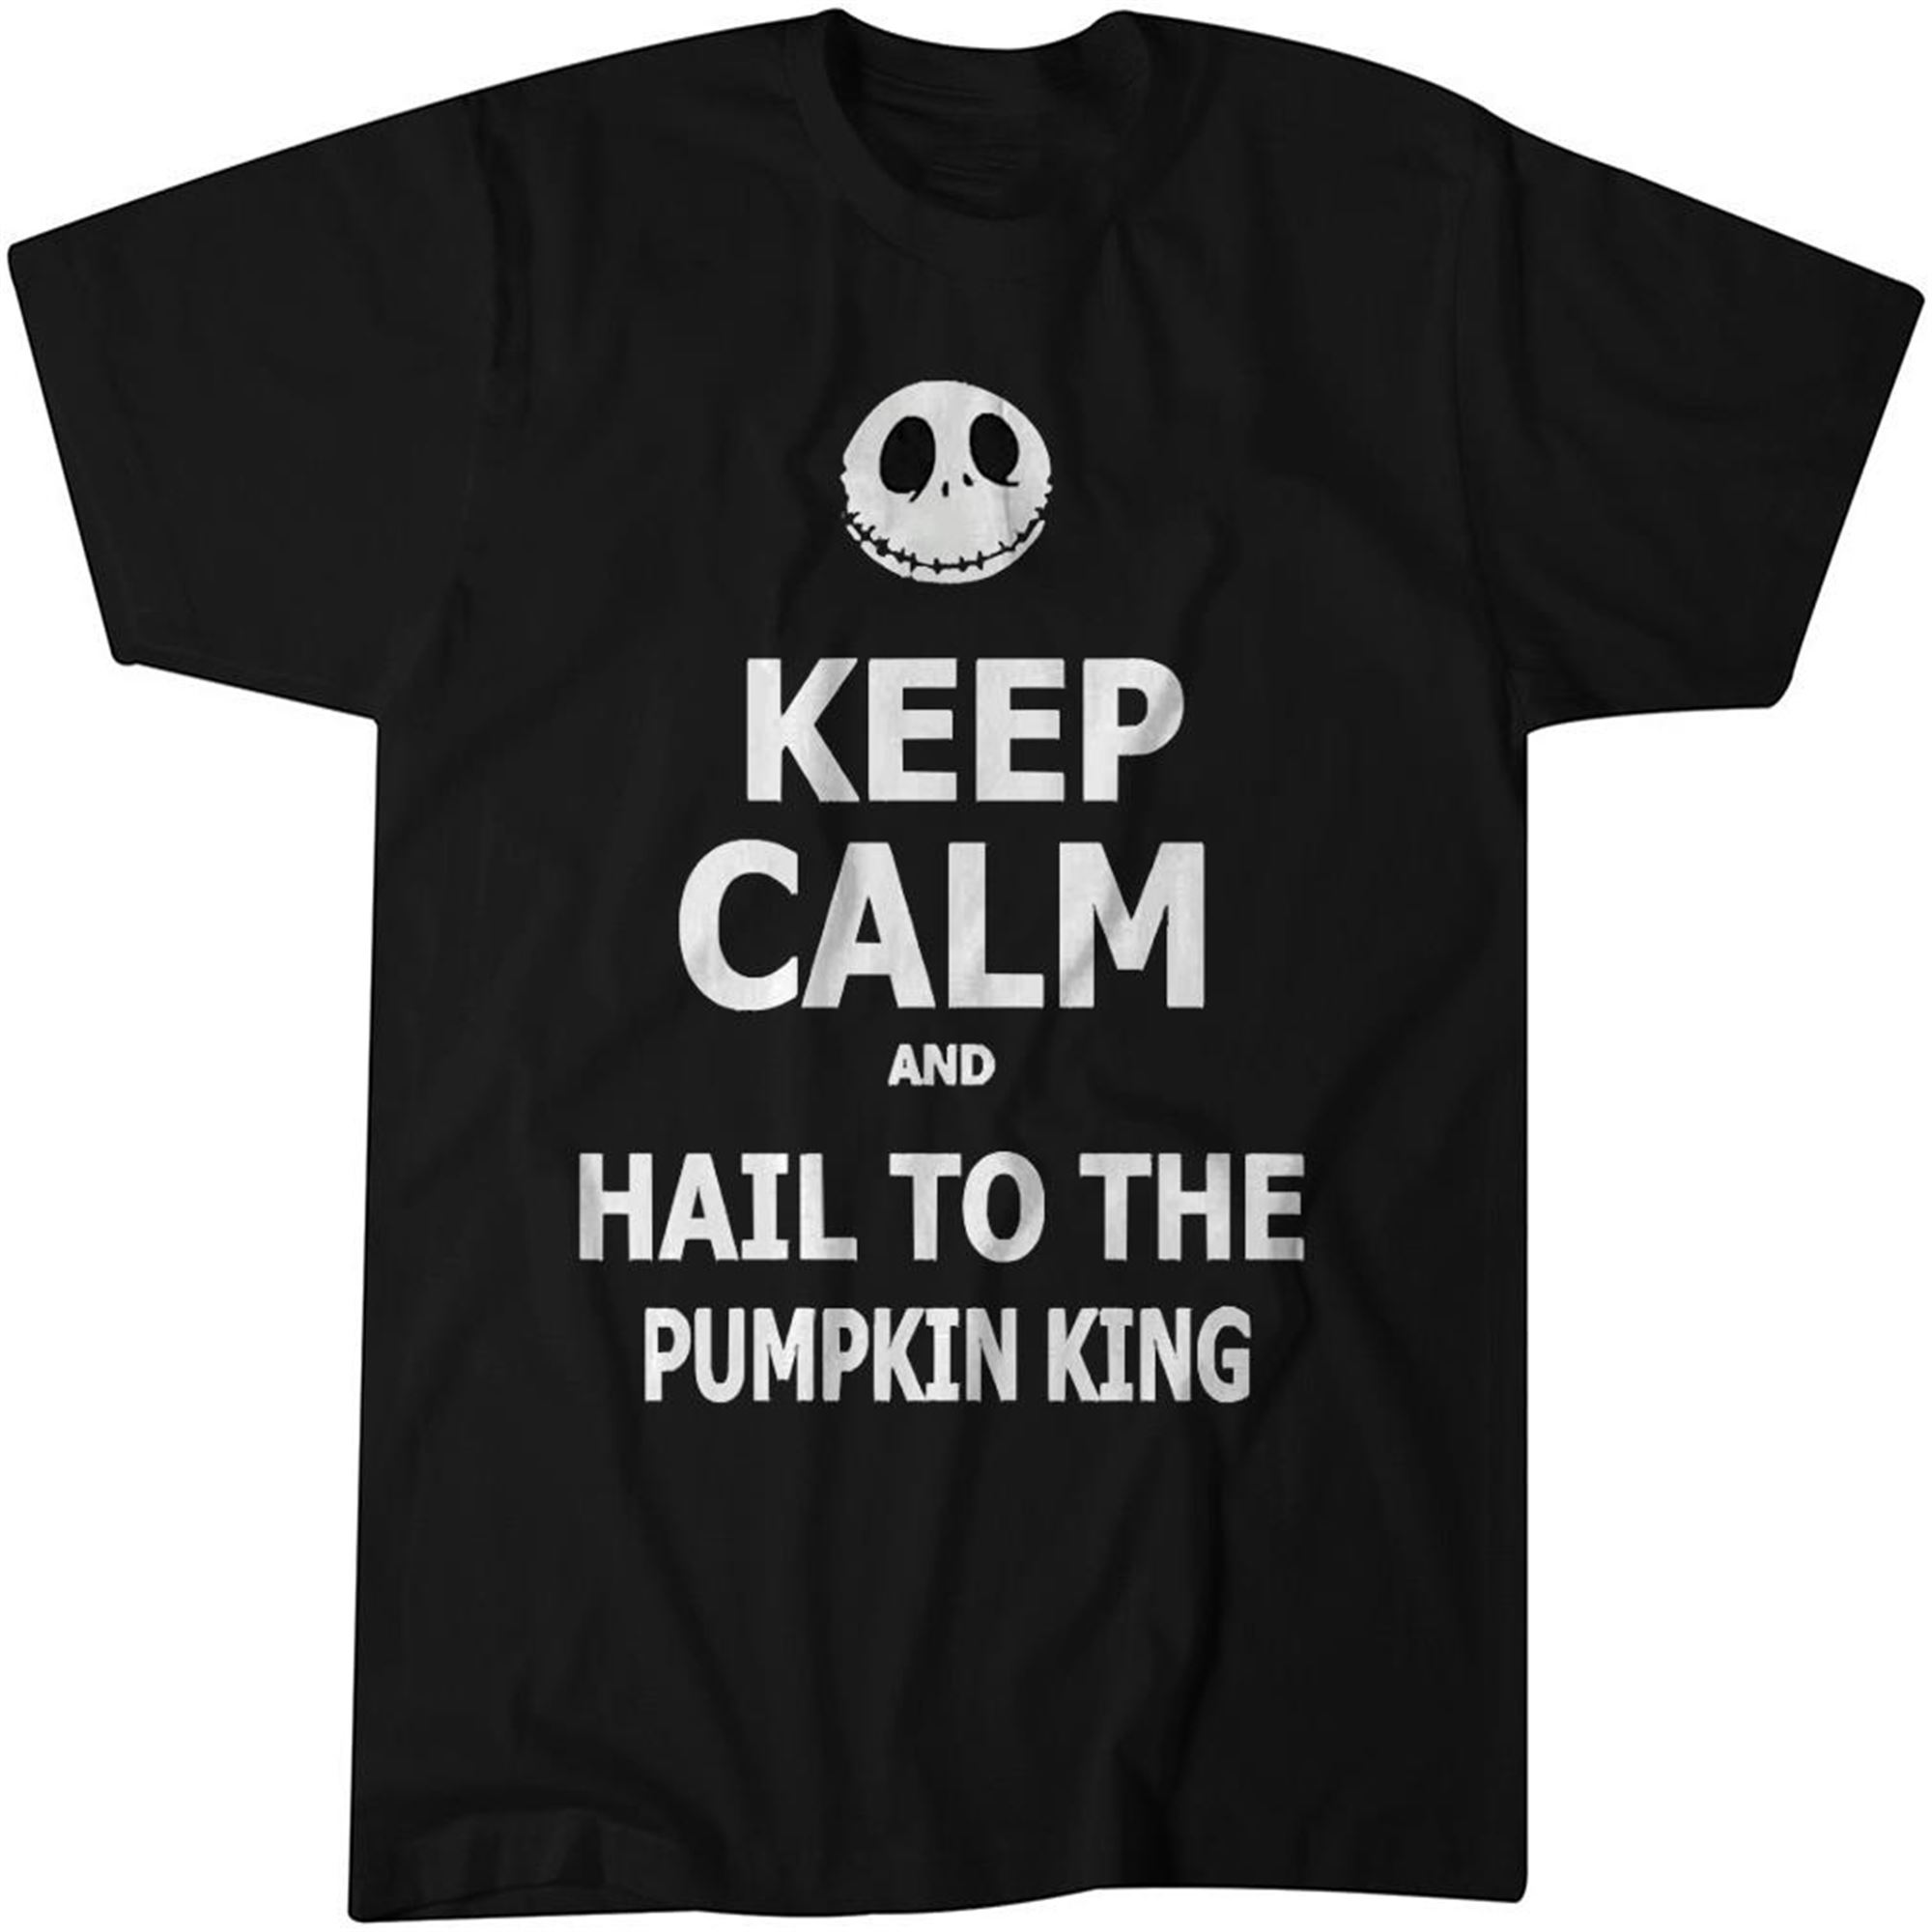 Keep Calm Hail To The Pumpkin King Essential T-shirt Full Size Up To 5xl